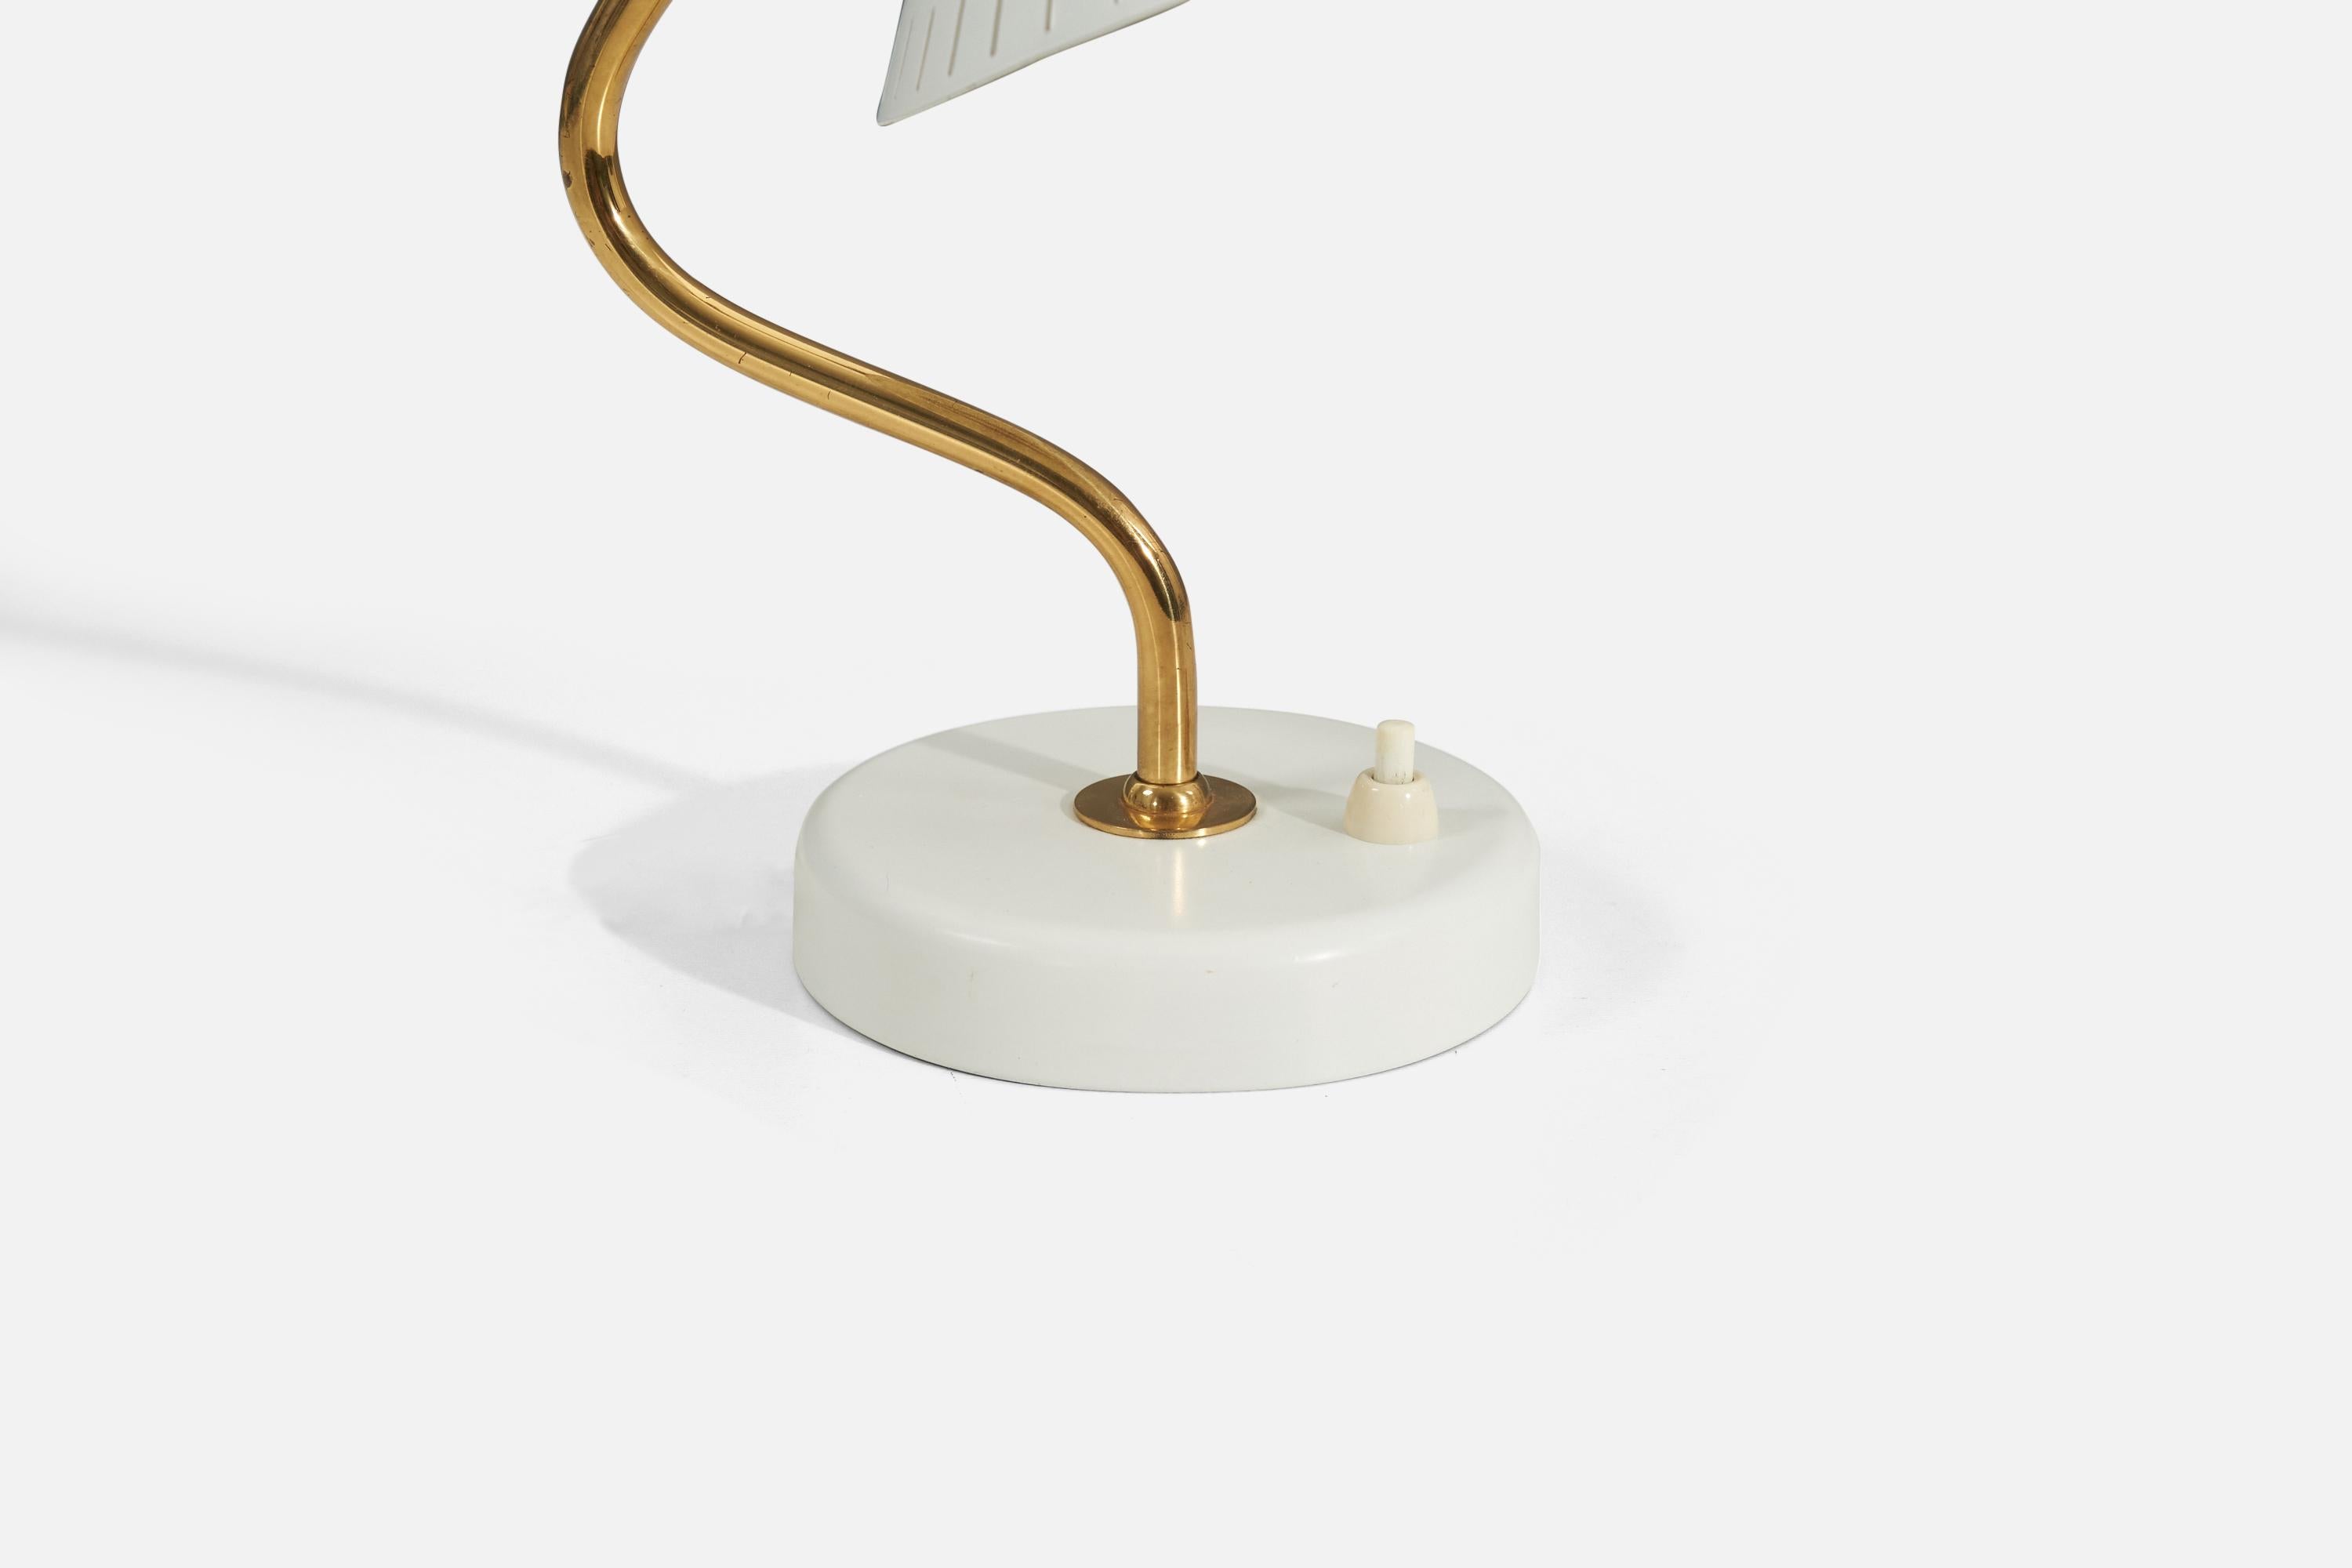 ASEA, Adjustable Table Lamp, Brass, White-Lacquered Metal, Sweden, 1950s In Good Condition For Sale In High Point, NC